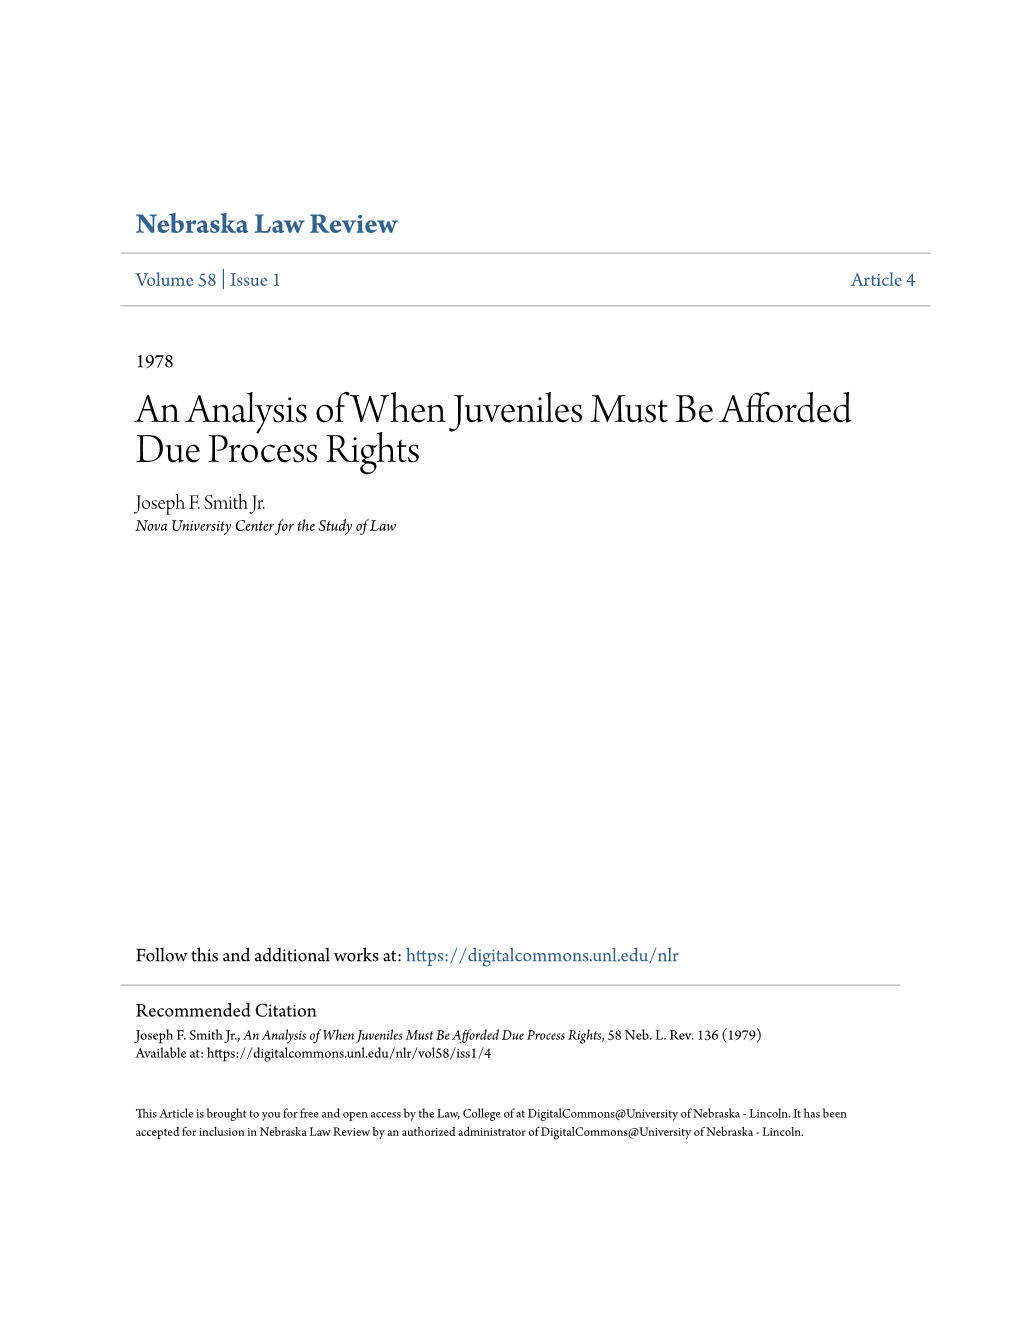 An Analysis of When Juveniles Must Be Afforded Due Process Rights Joseph F